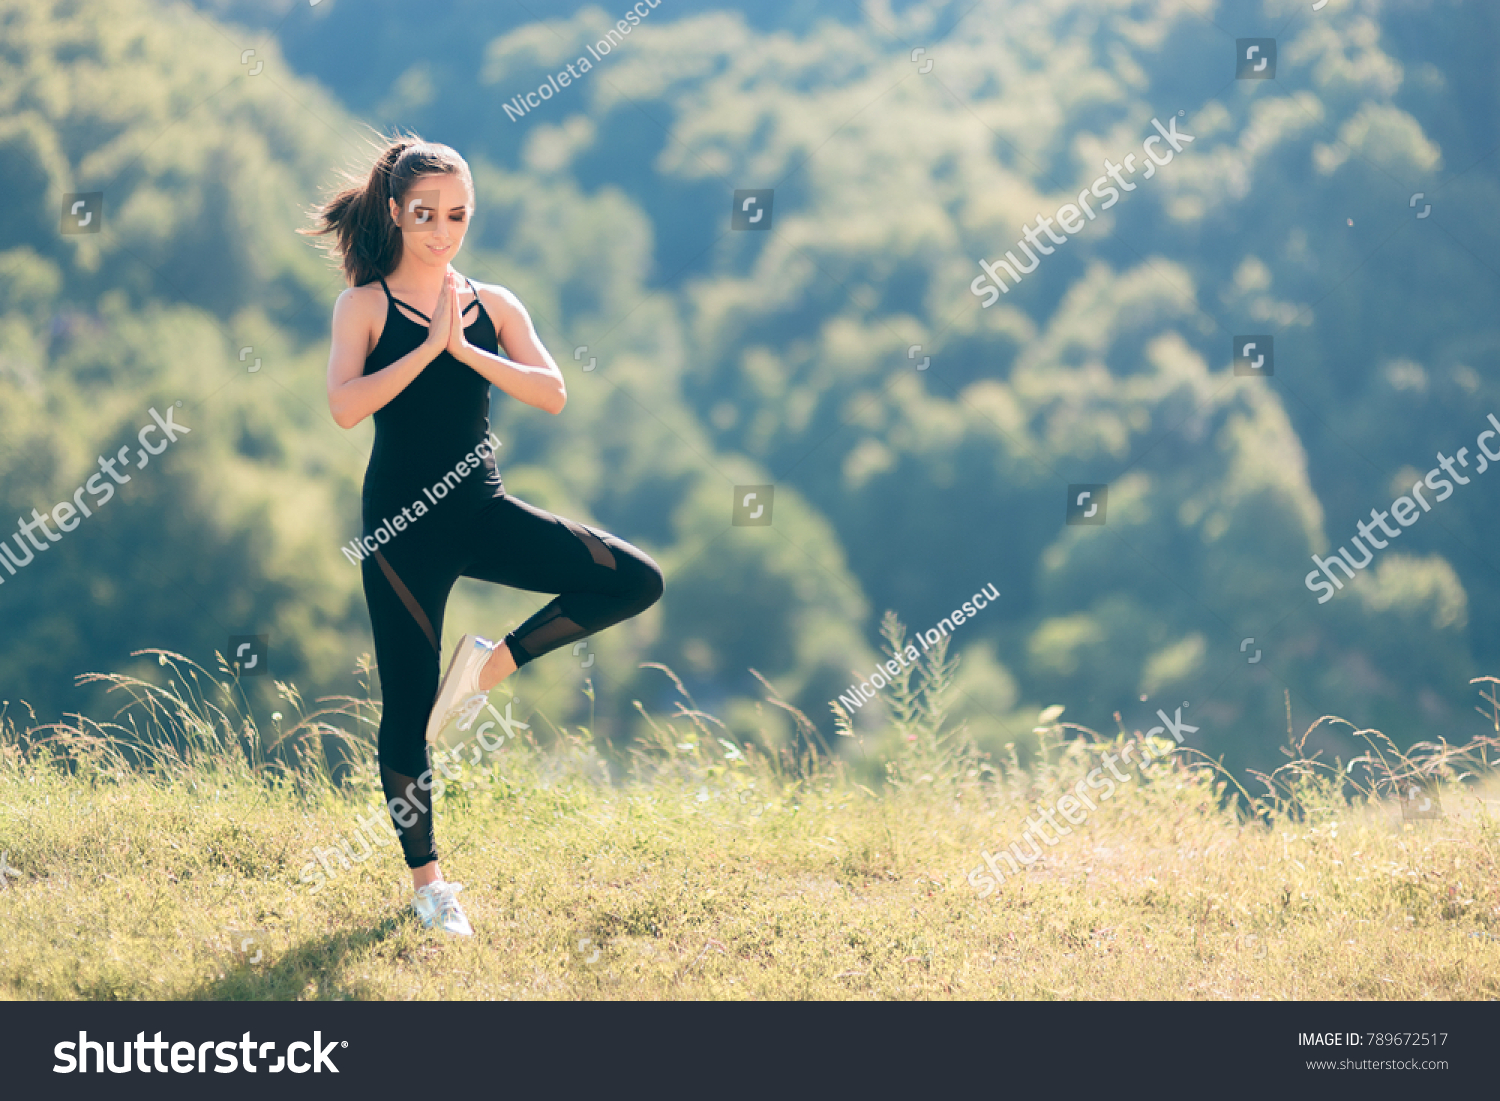 Woman in Tree Yoga Pose Wearing  Overall Jumpsuit Exercising Outside. Fit girl in sporty outfit active wear outdoors in nature ready to exercise
 #789672517